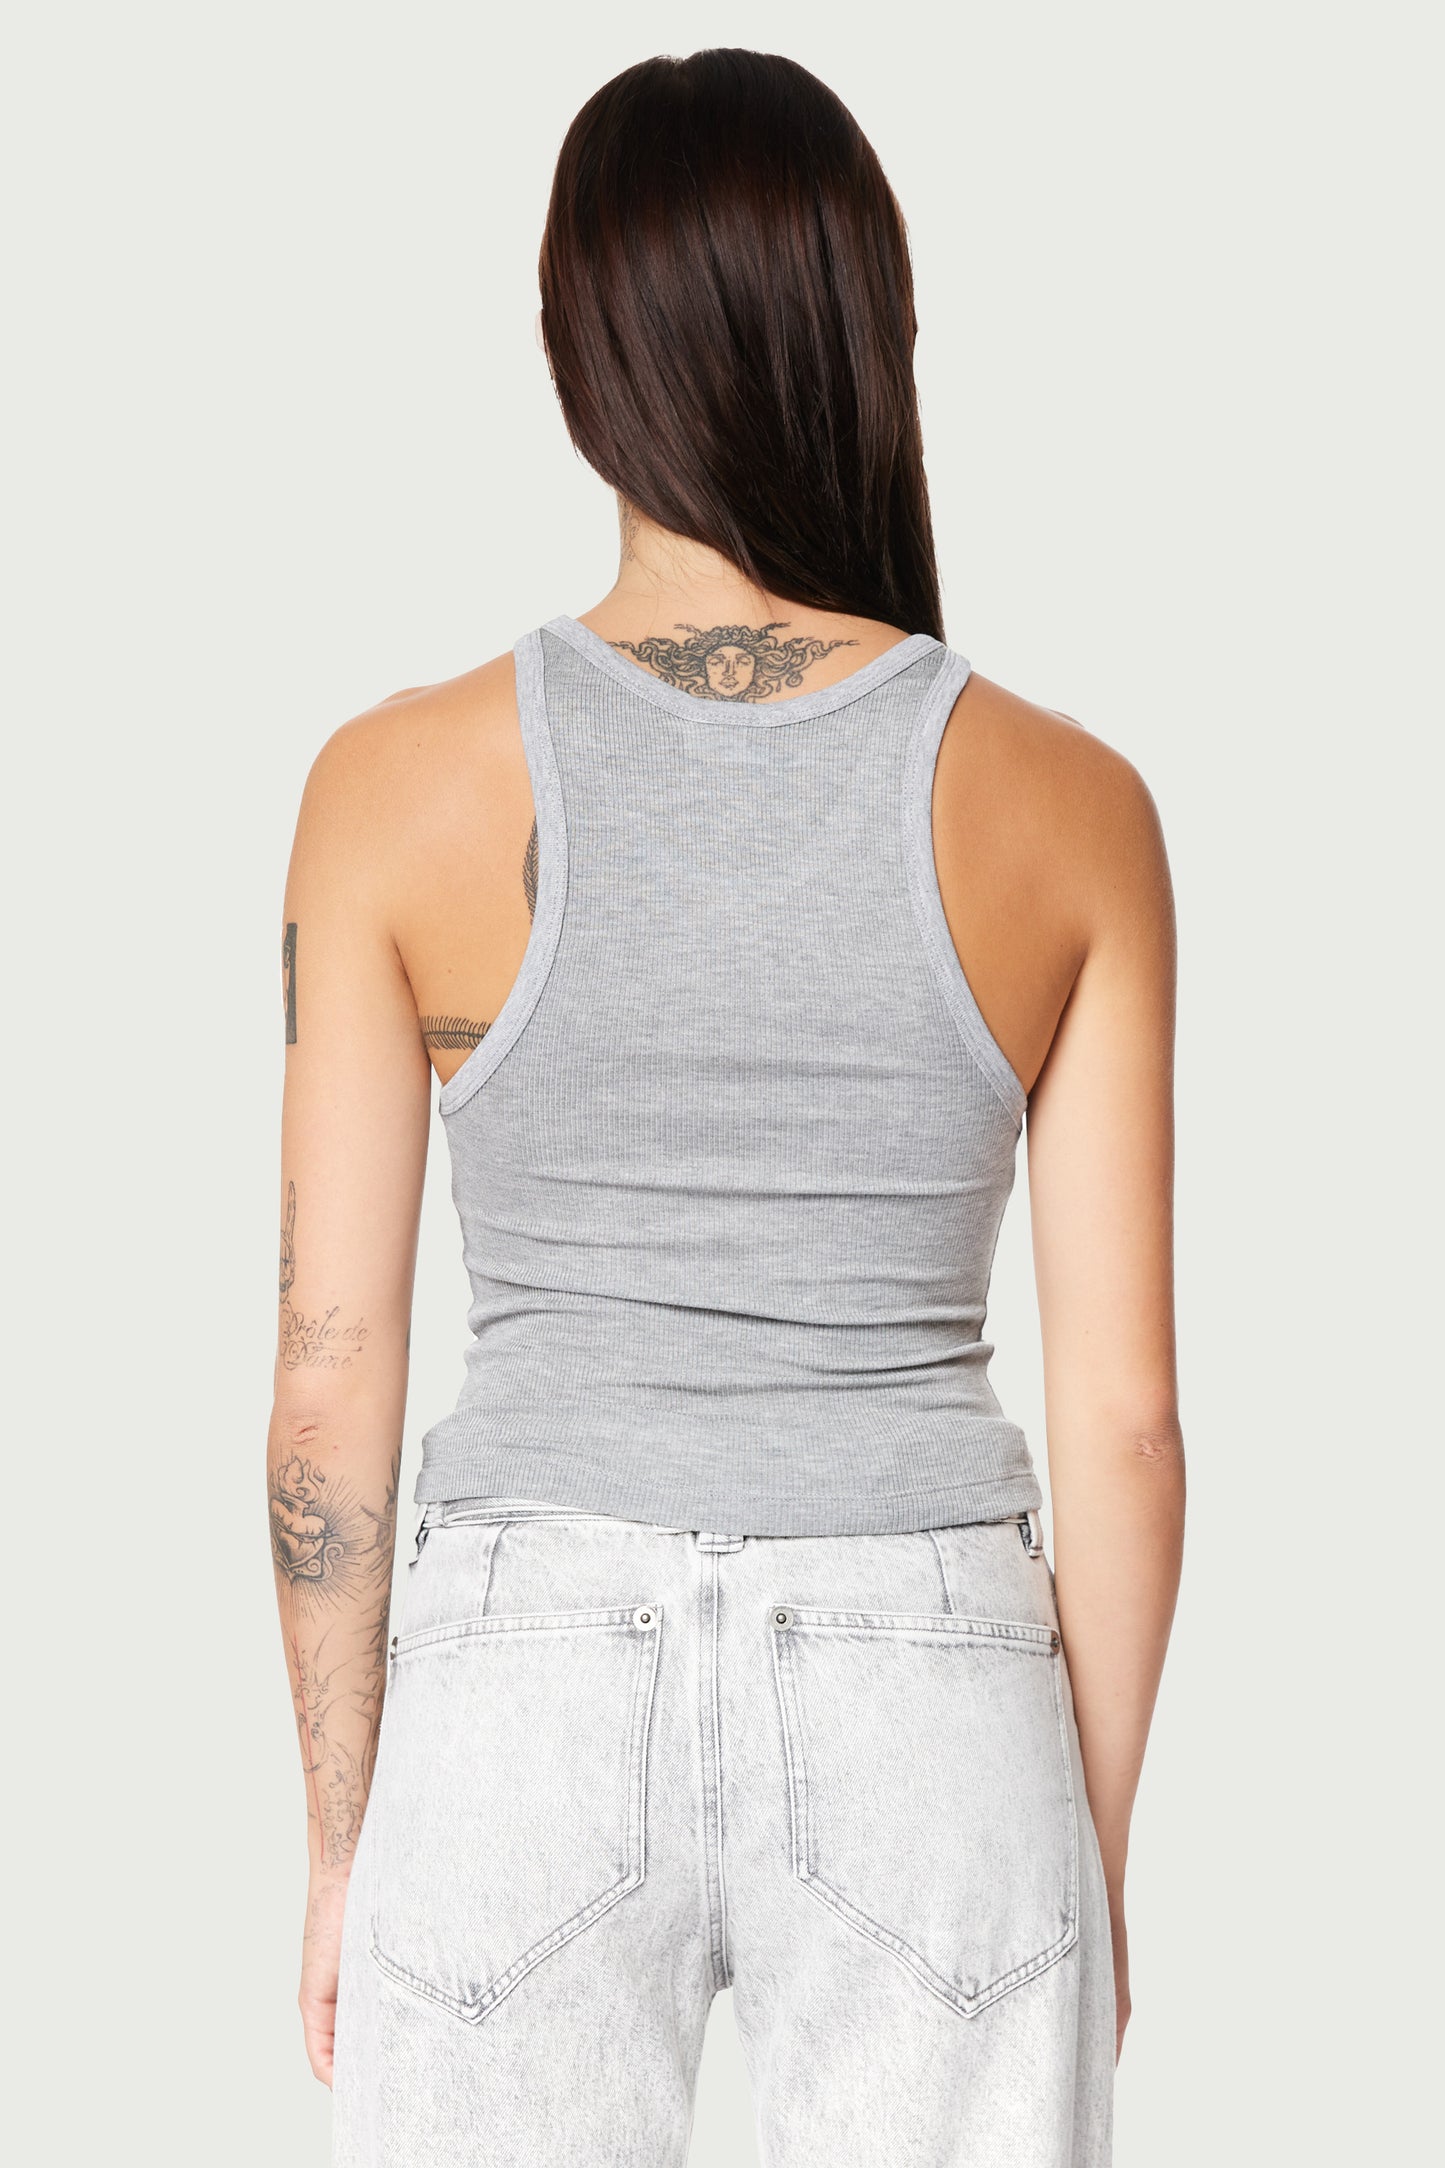 WOMEN'S CONTROVERSIAL MUSE TANK